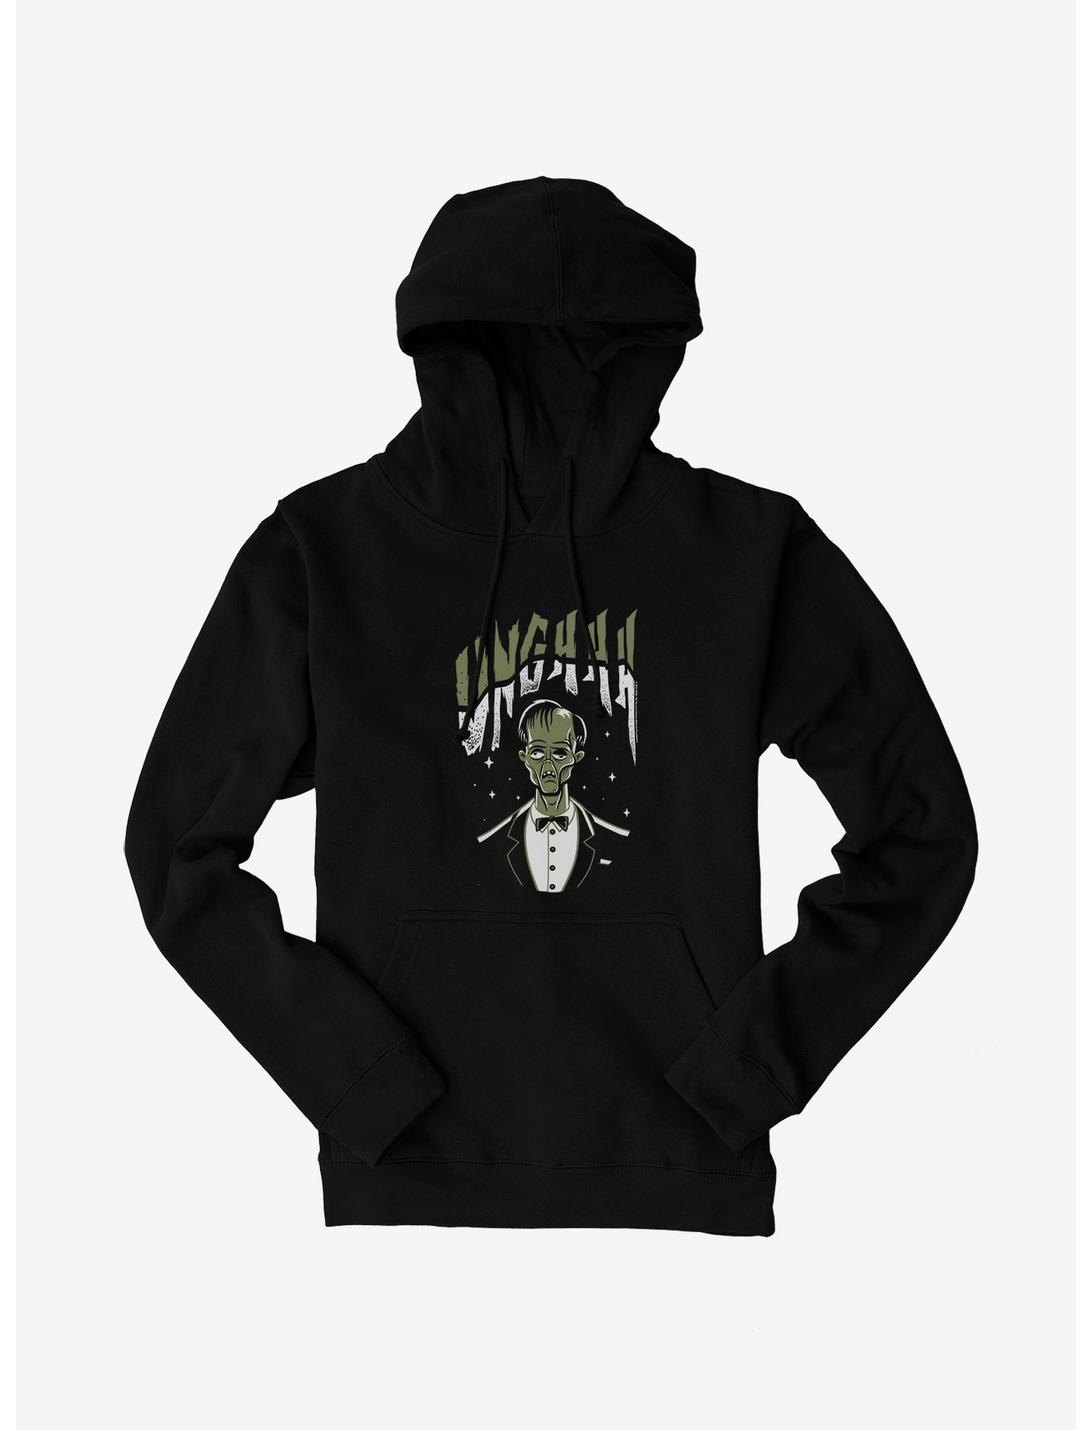 Addams Family Movie Caricature Lurch Unghhh Hoodie, BLACK, hi-res